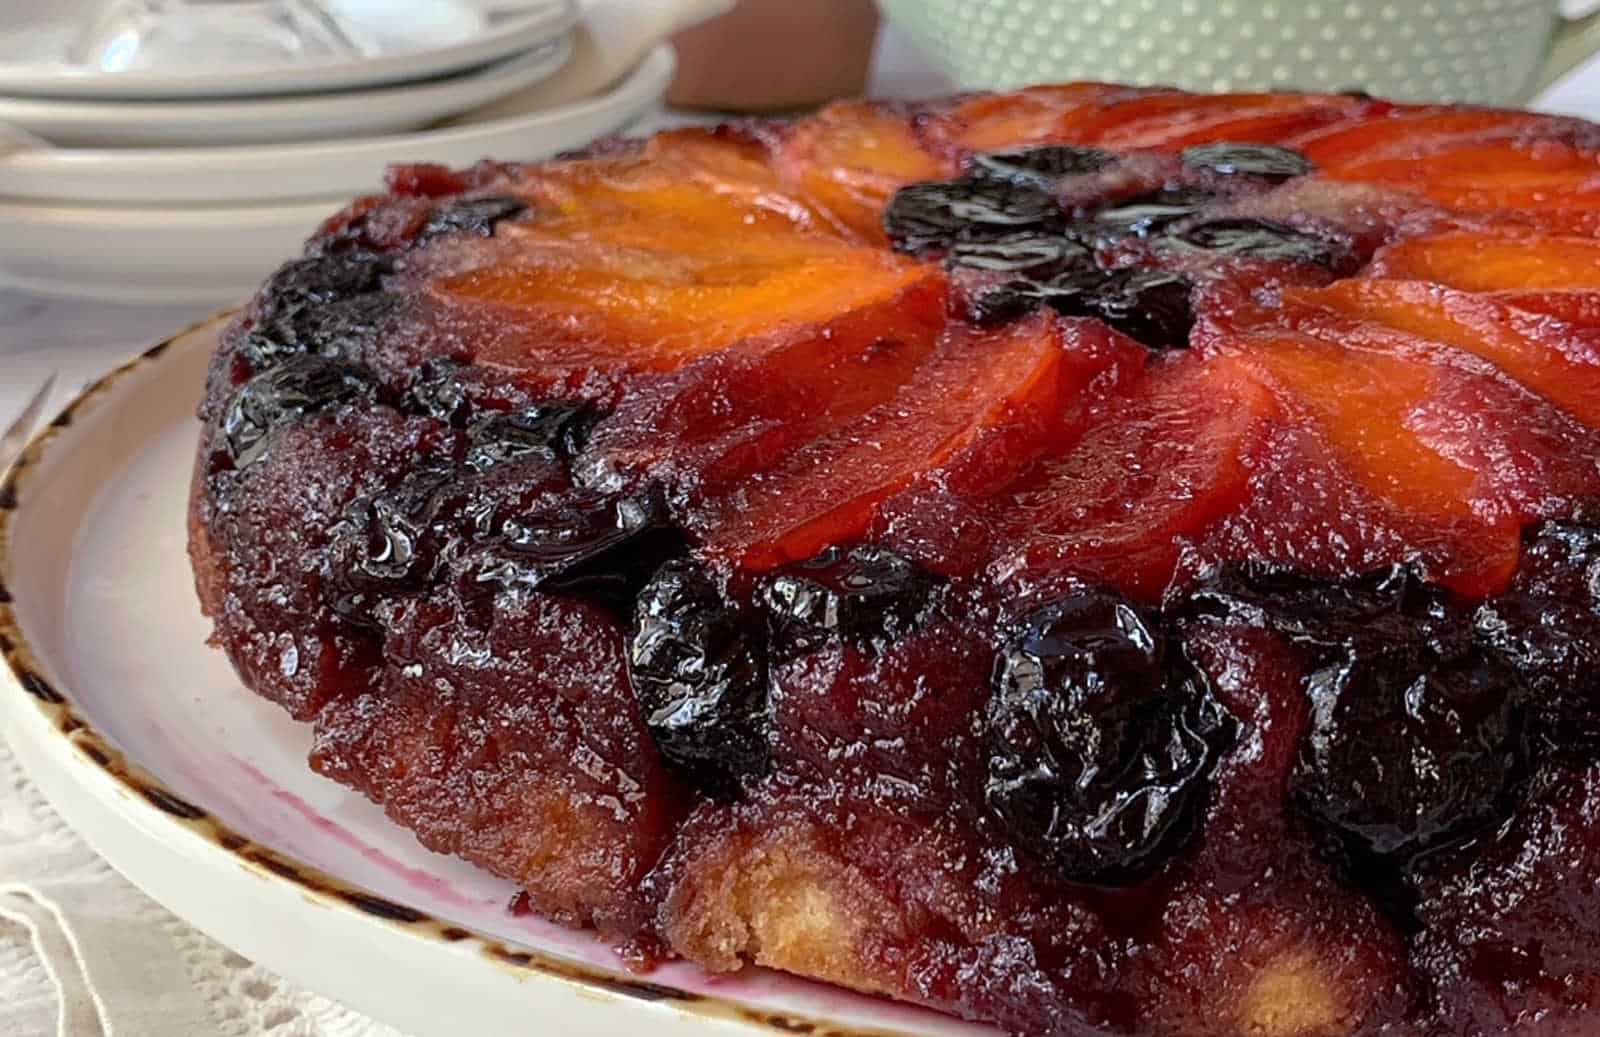 Cherry apricot upside down cake on a white platter.